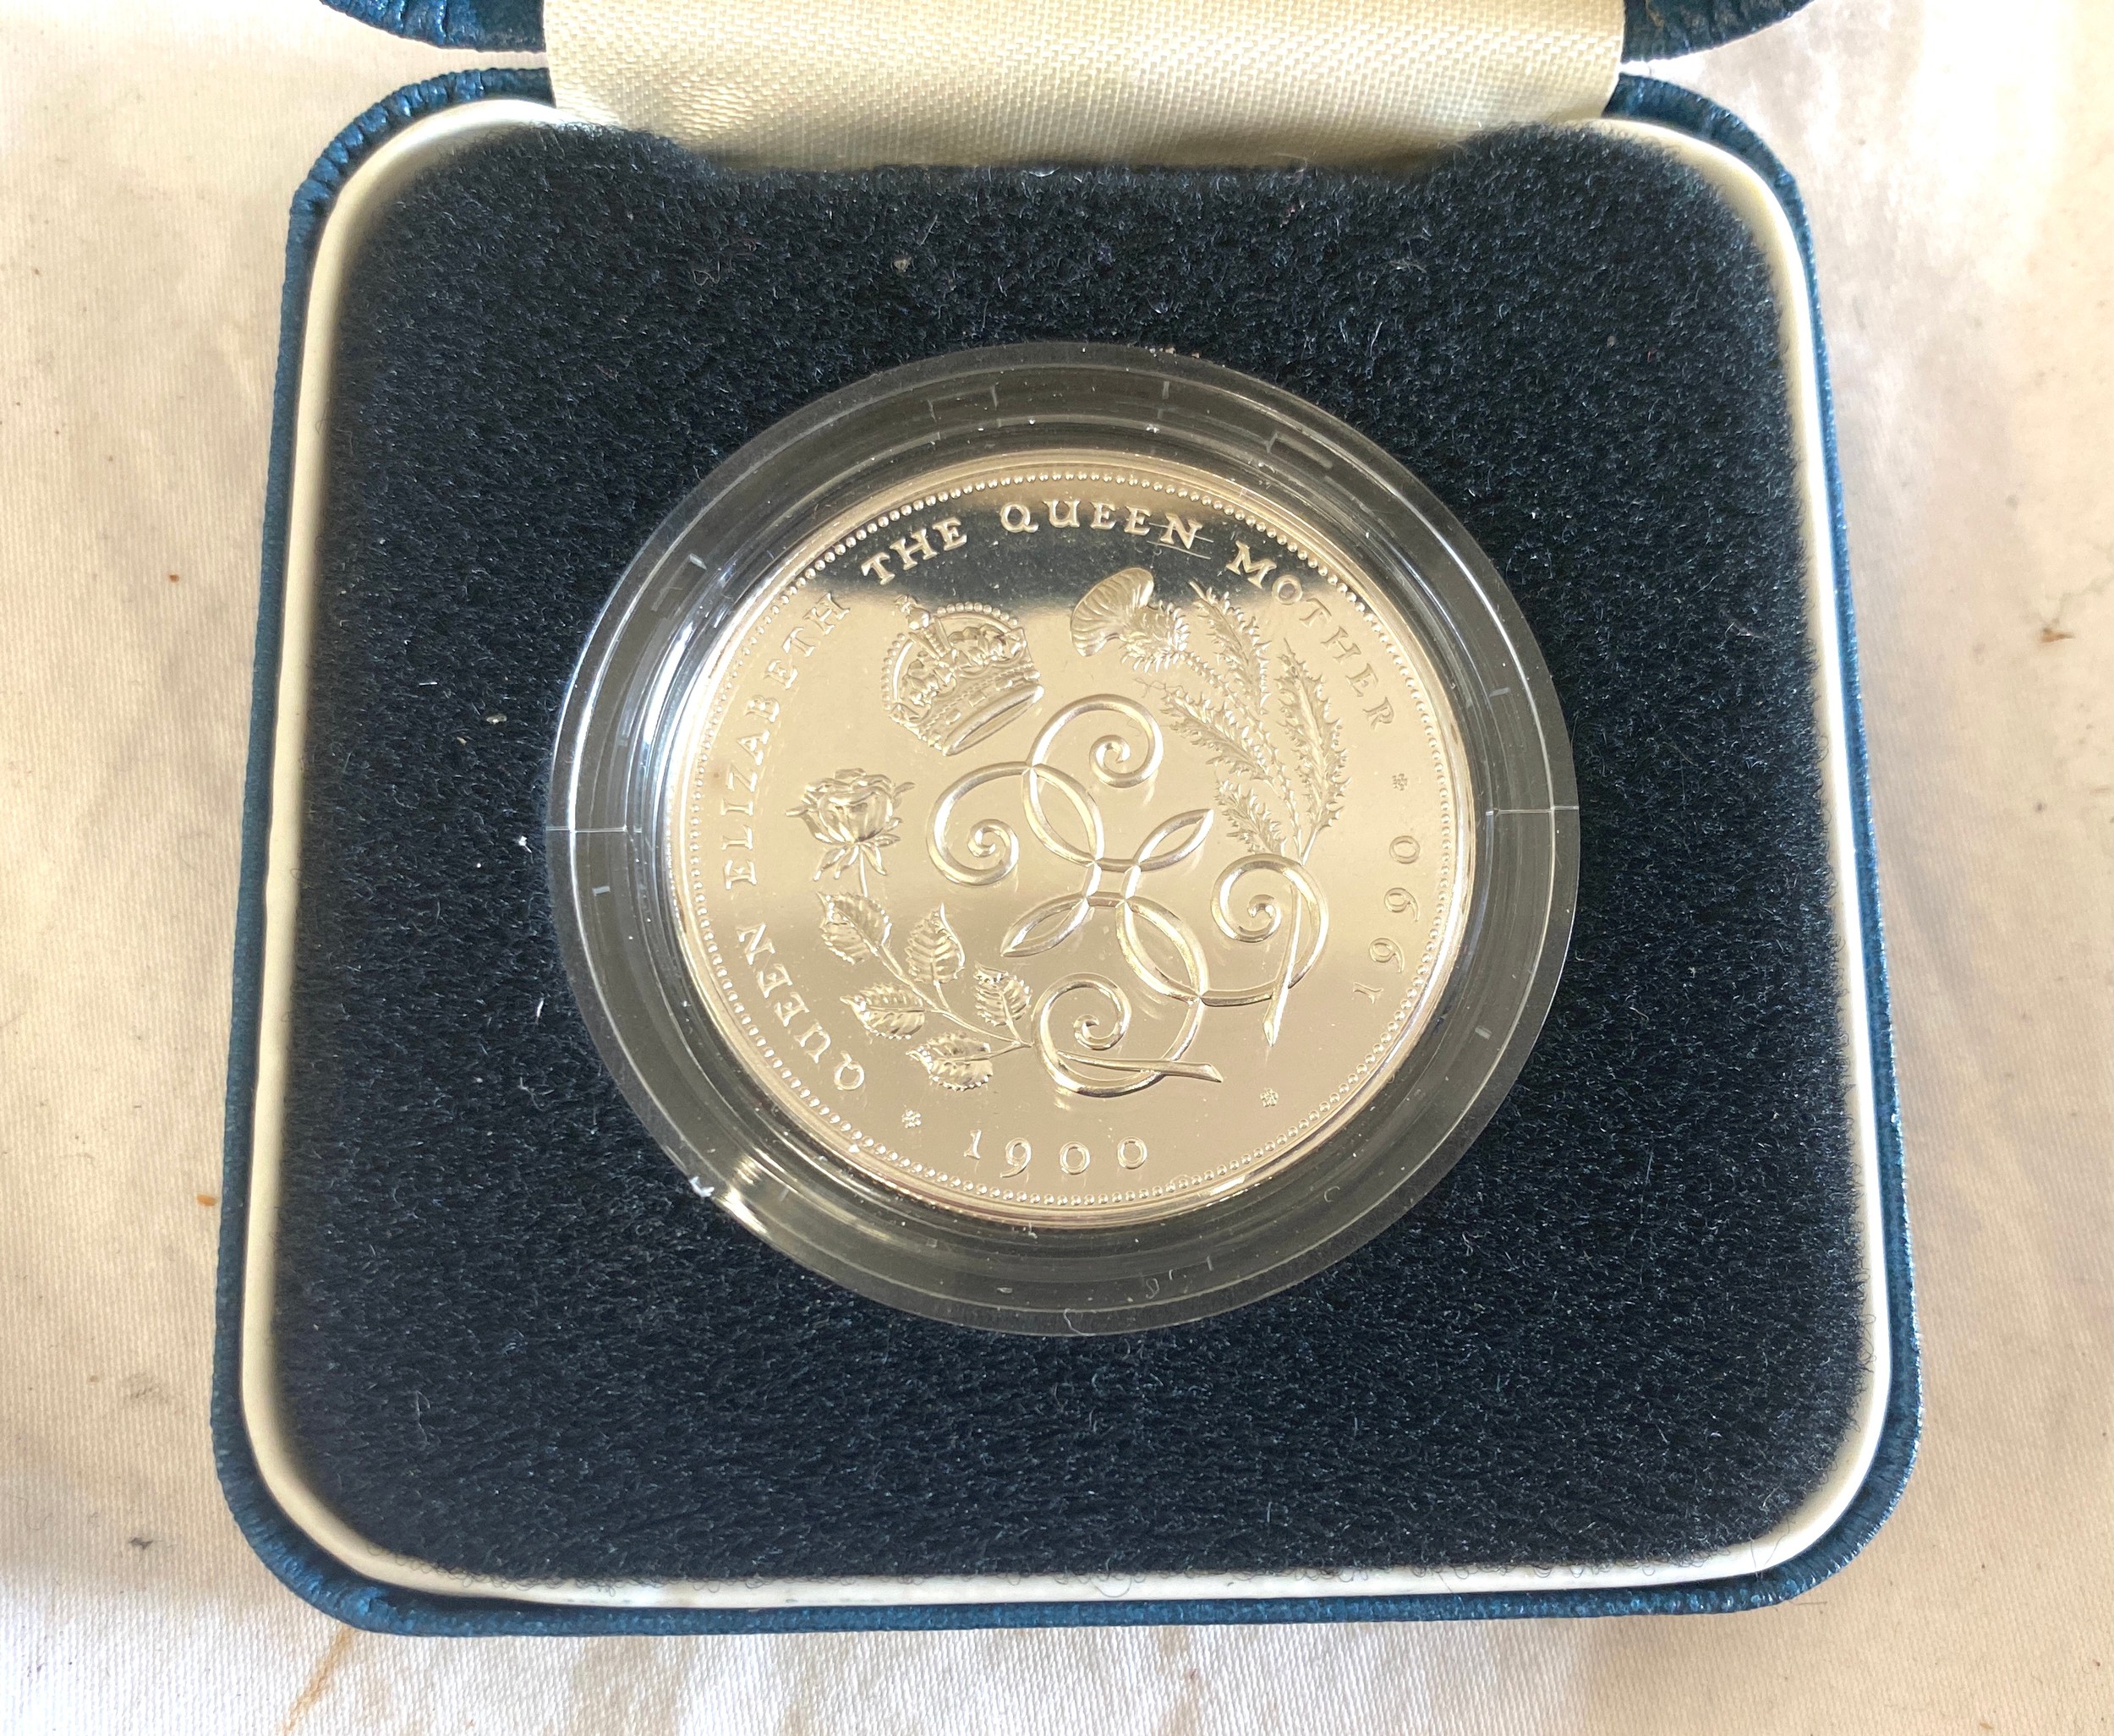 Royal mint the Queen Mother commemorative coin - Image 2 of 3